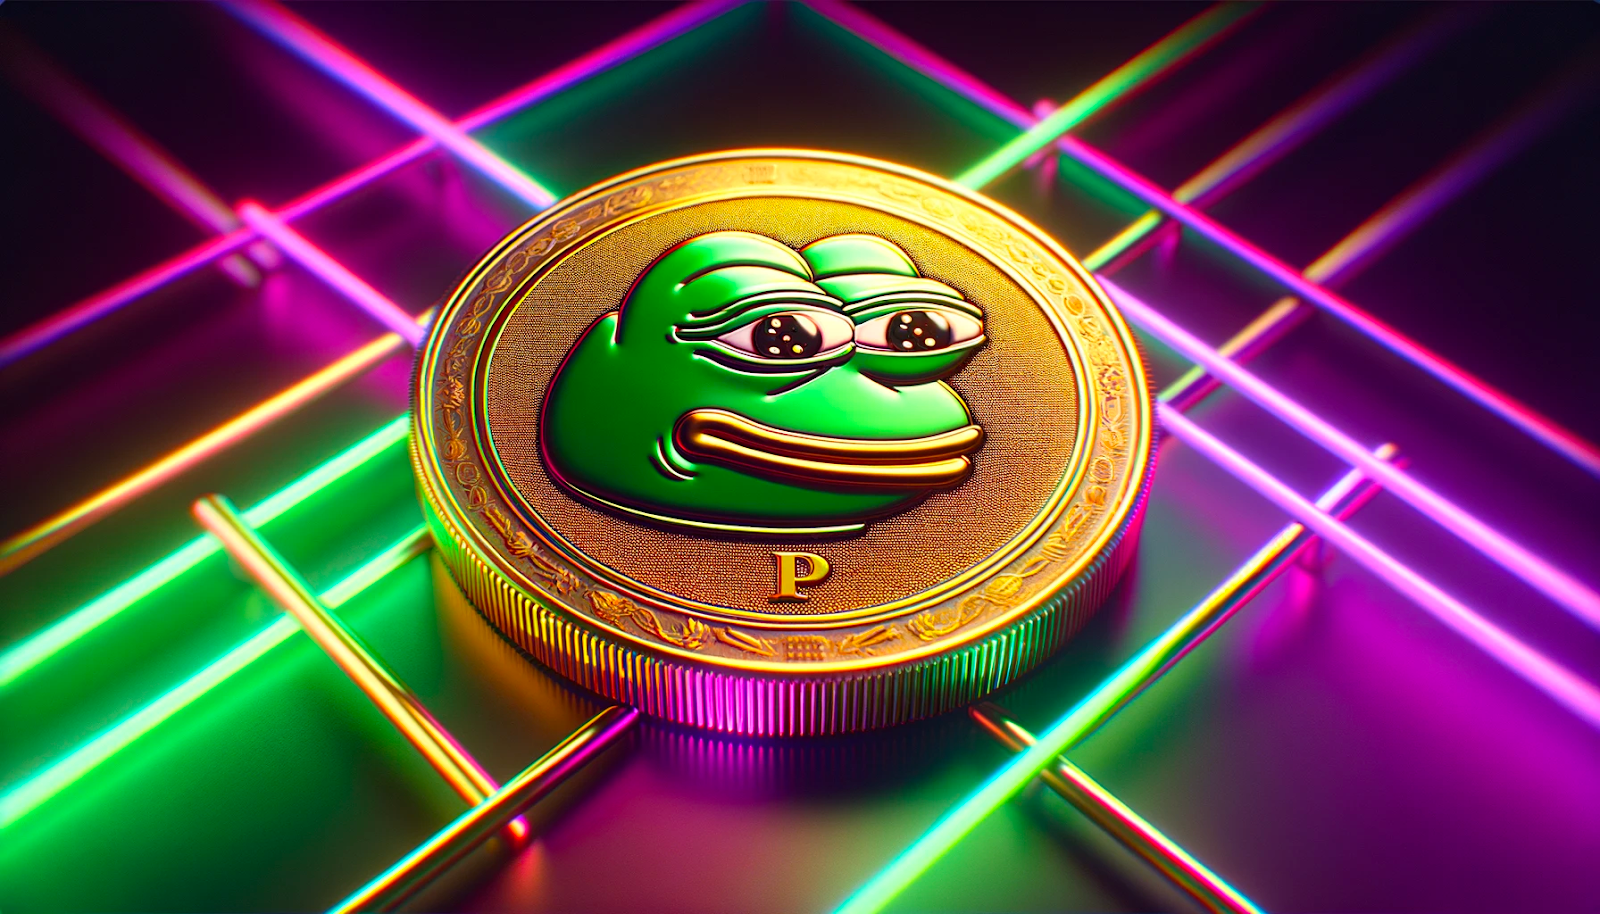 How To Buy Pepe Coin (Memecoin Mania)